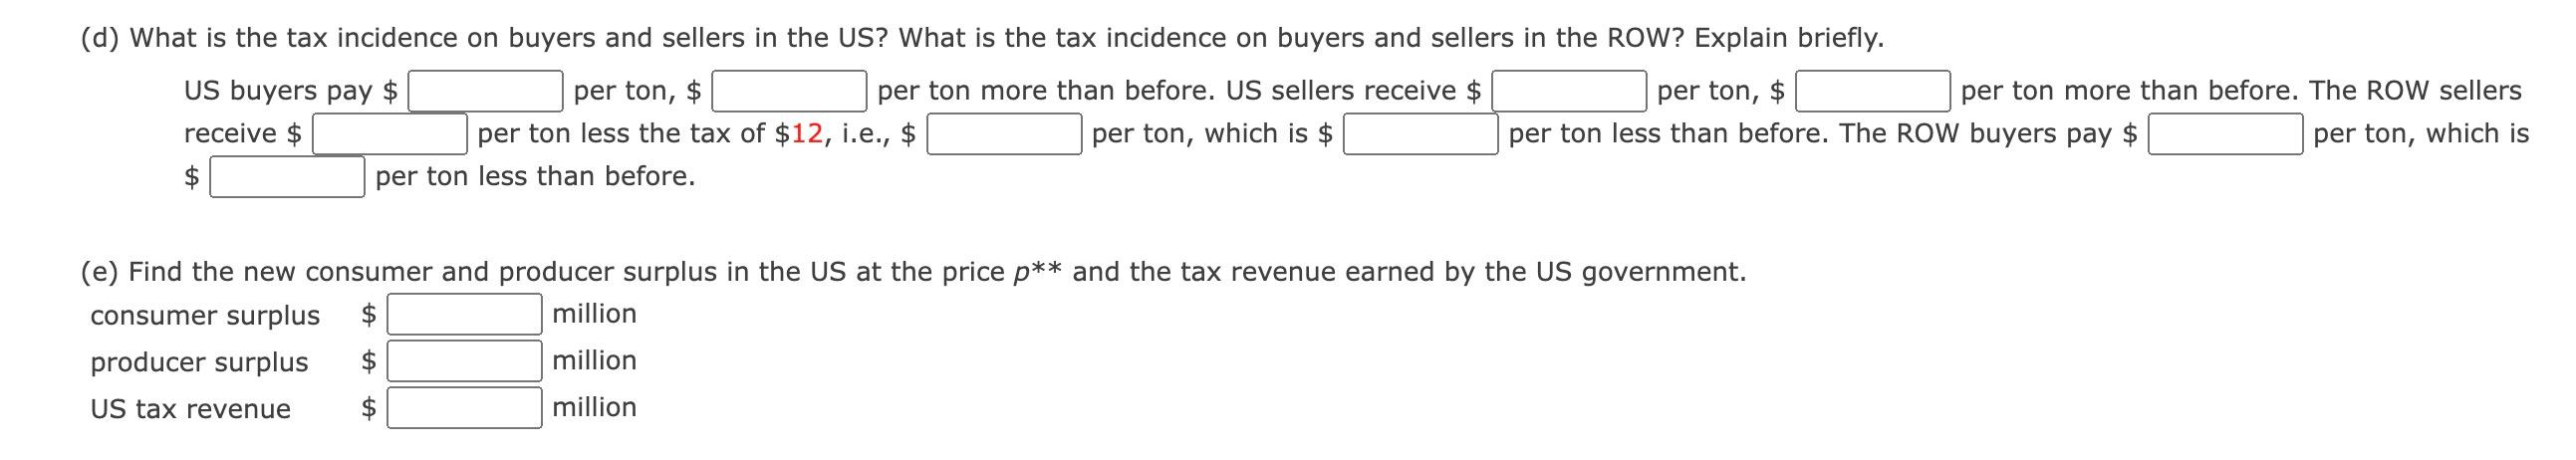 (d) What is the tax incidence on buyers and sellers in the US? What is the tax incidence on buyers and sellers in the ROW? Ex